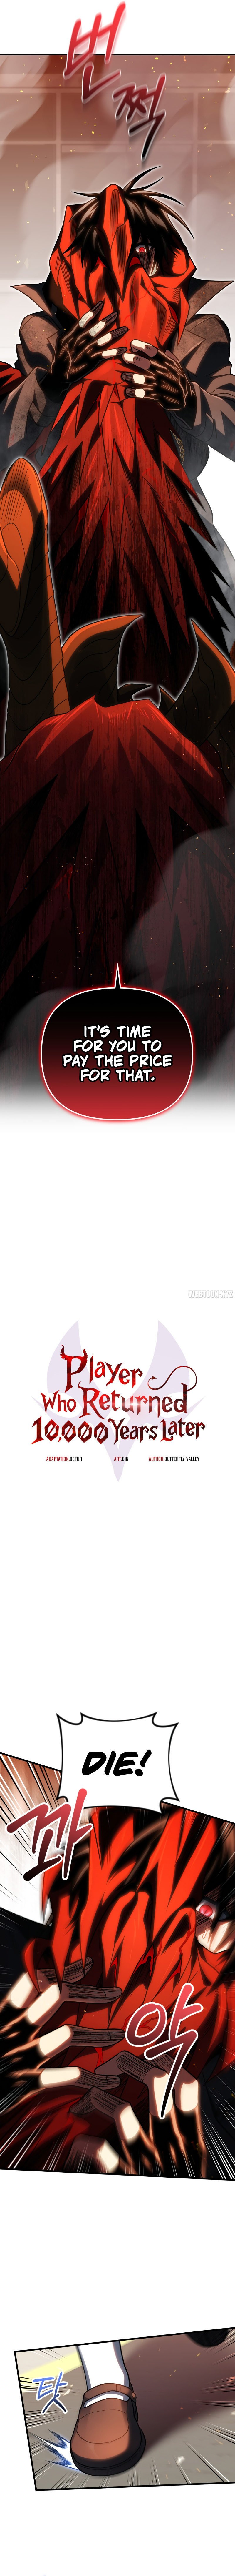 player-who-returned-10000-years-later-chap-74-4